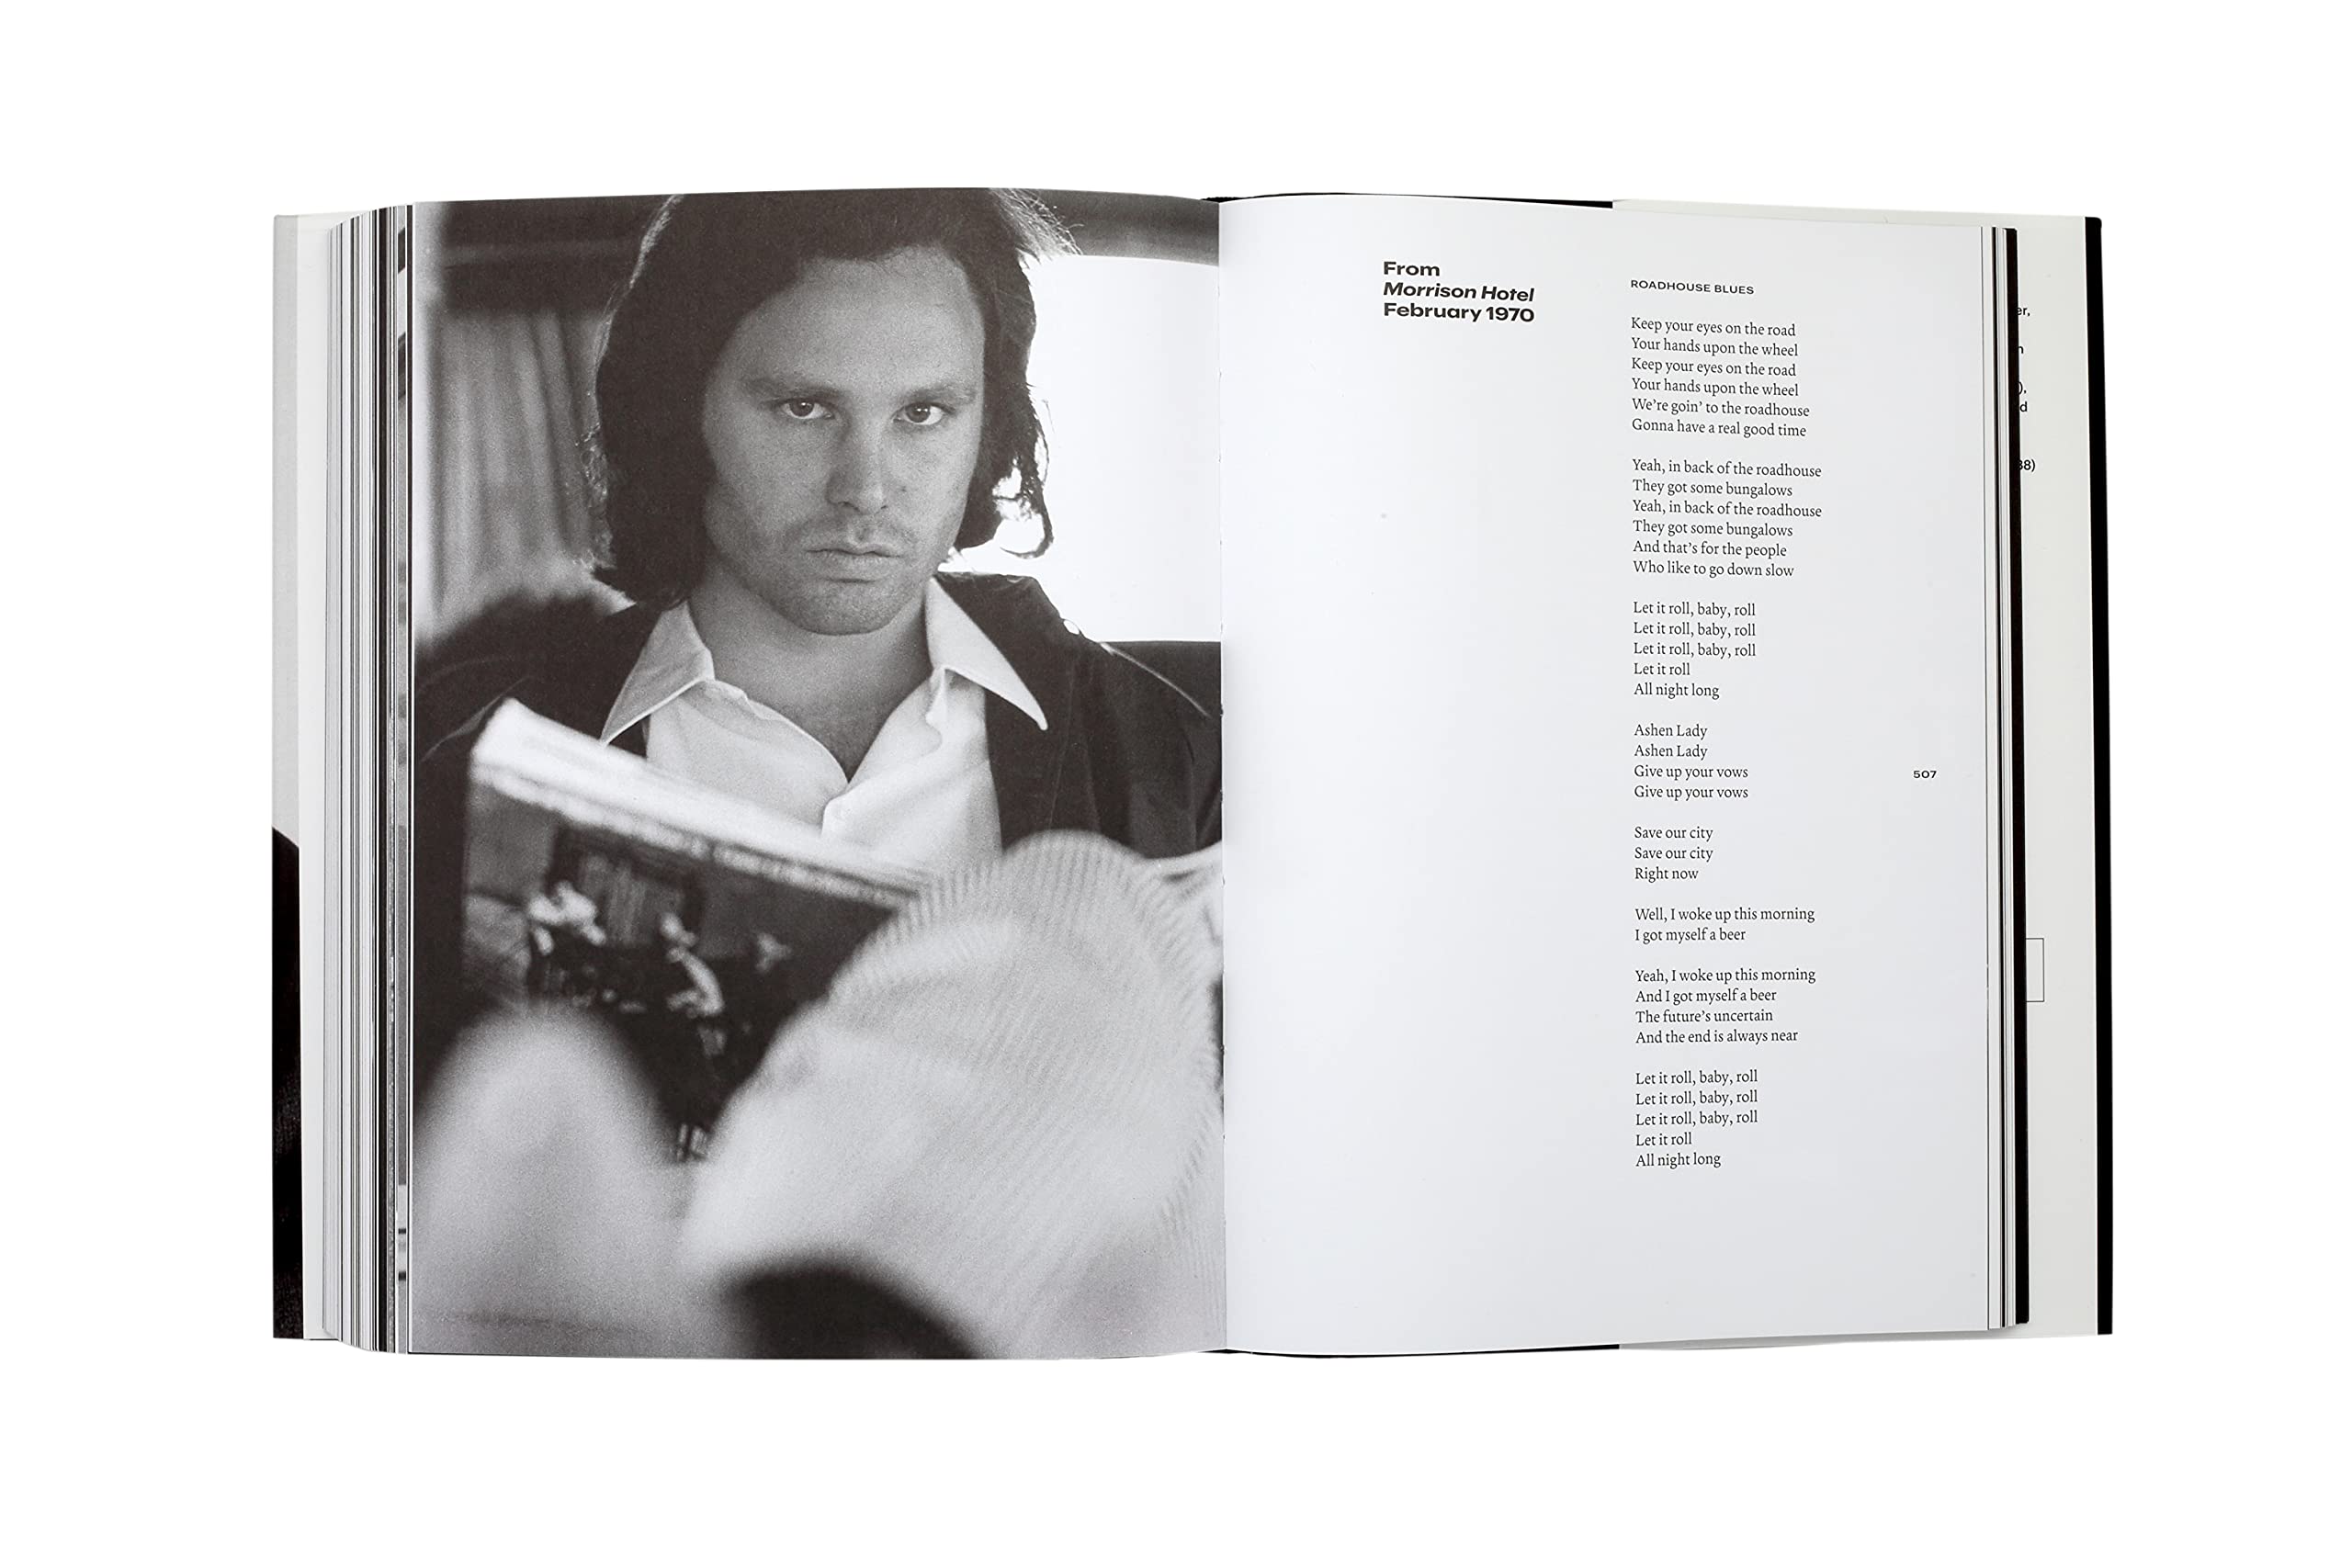 The Collected Works of Jim Morrison: Poetry, Journals, Transcripts, and Lyrics